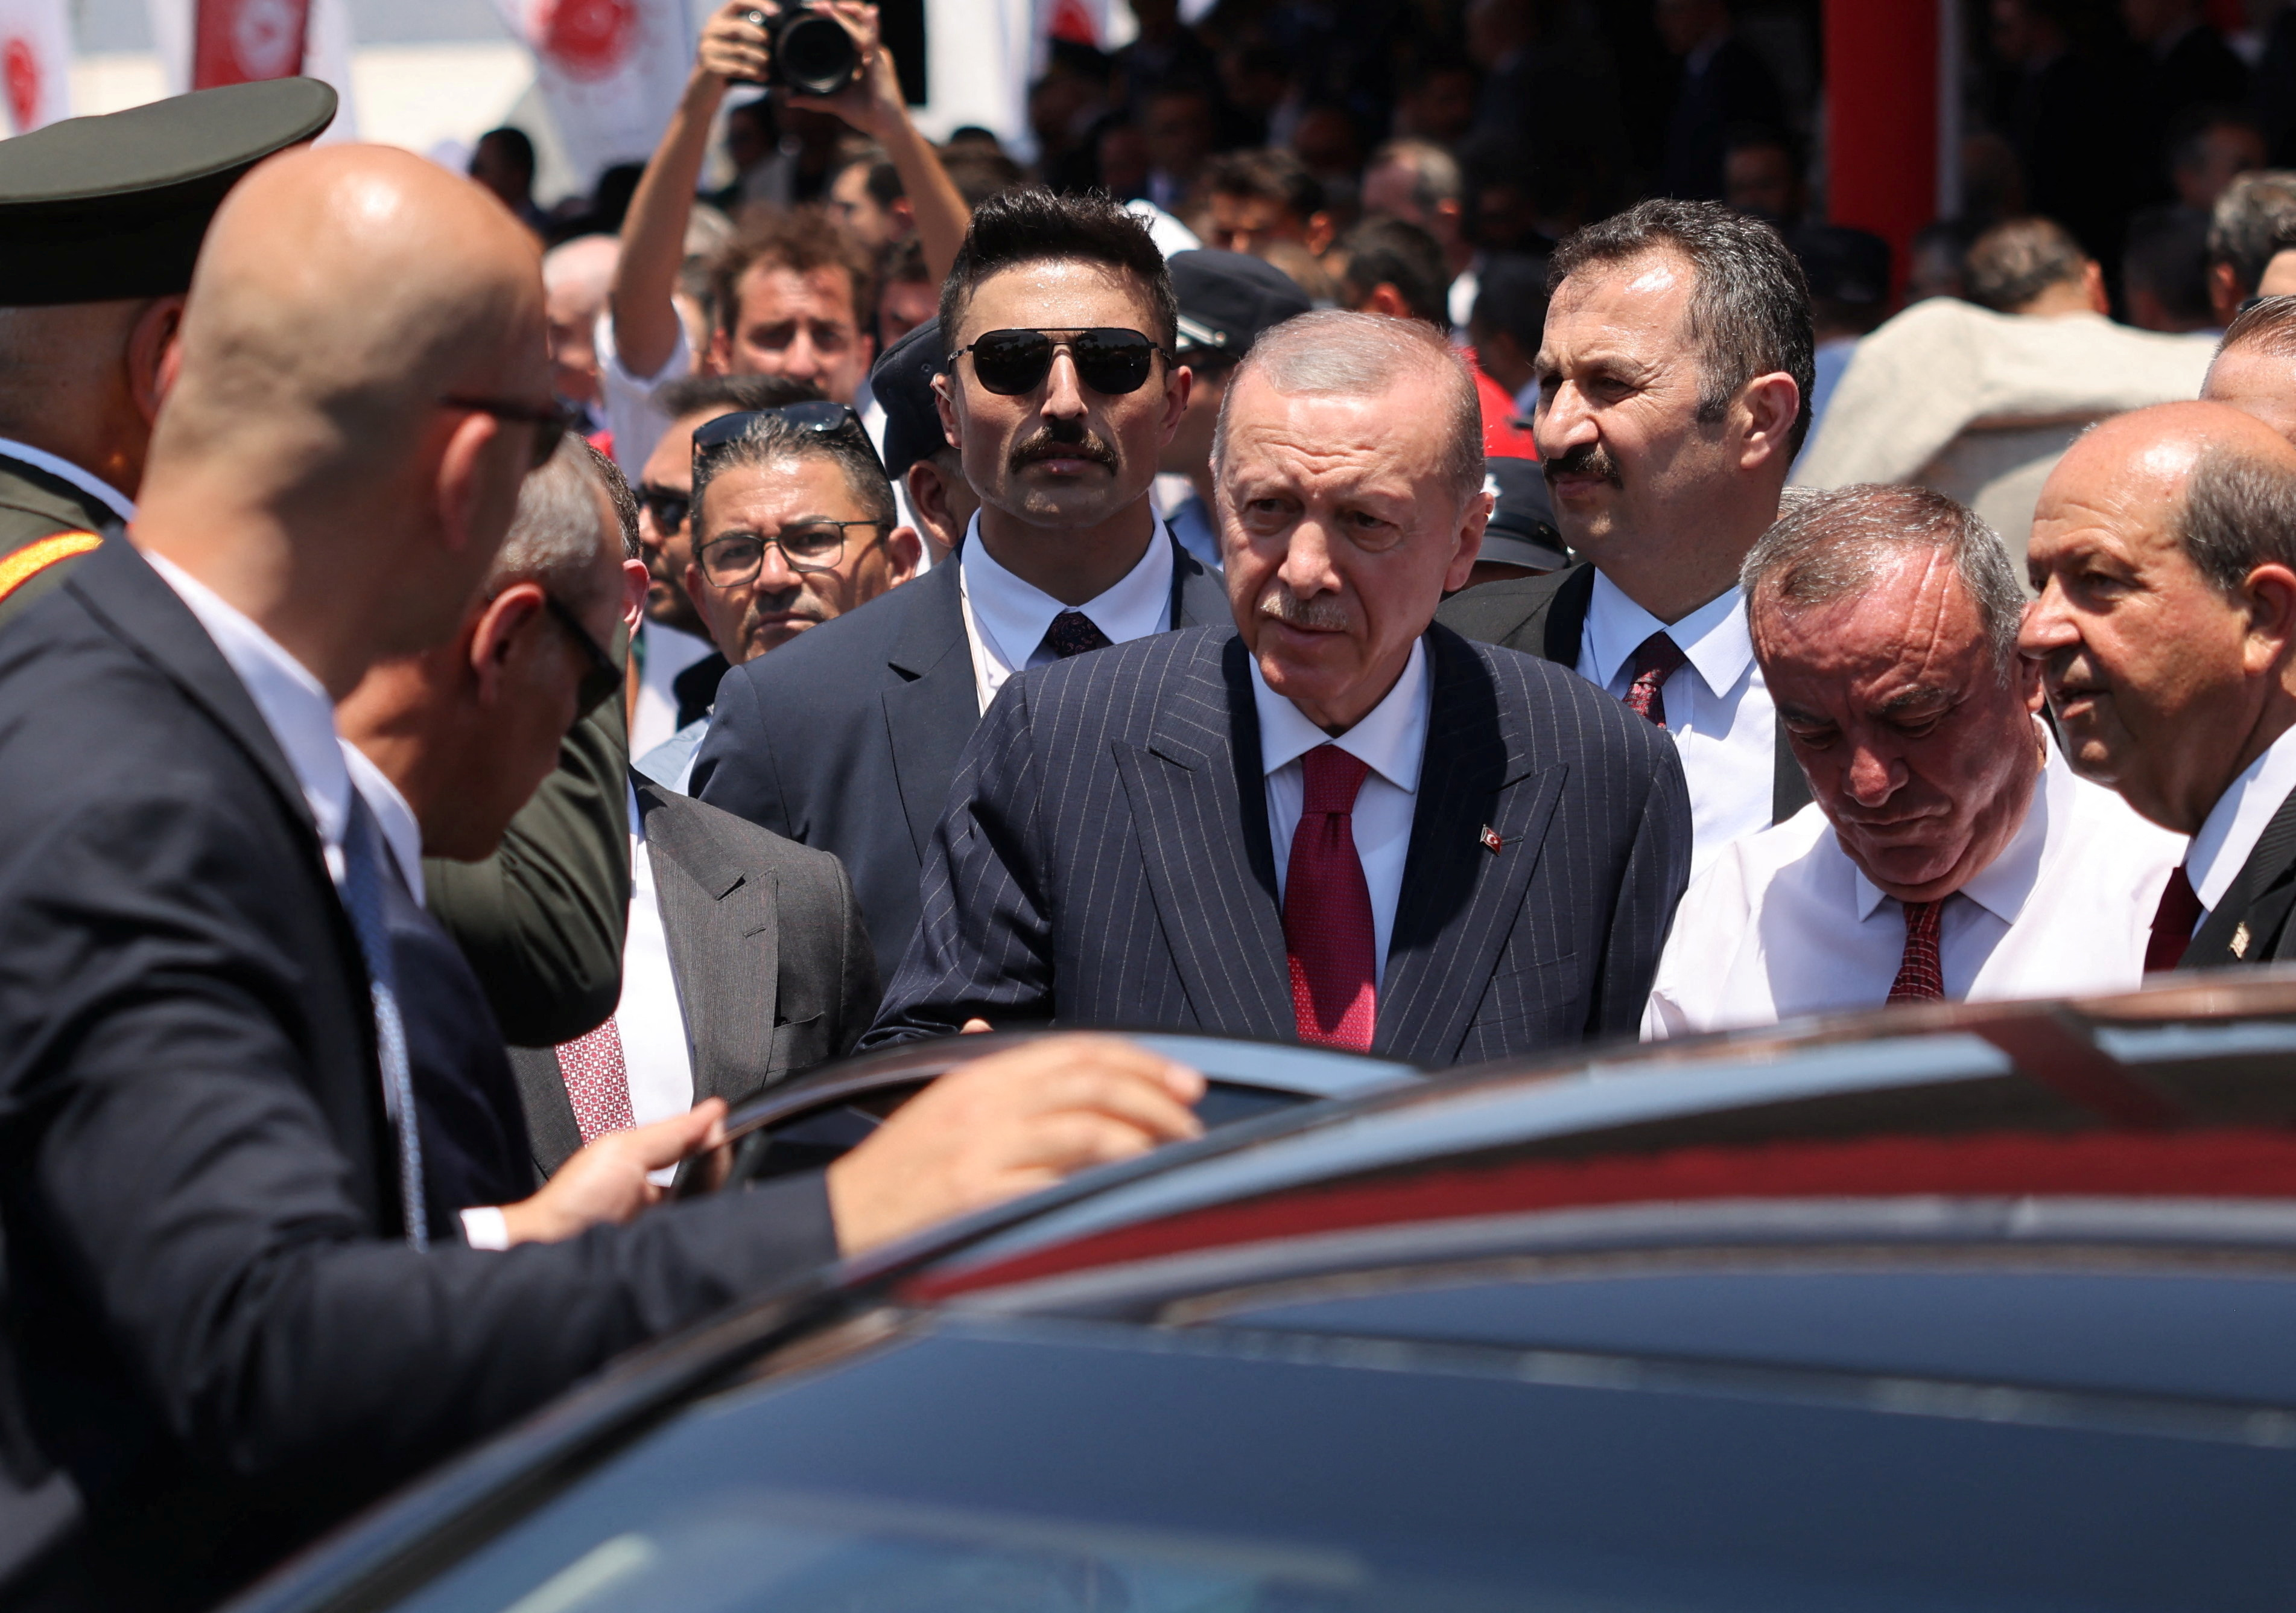 Erdogan reiterates call for two state solution